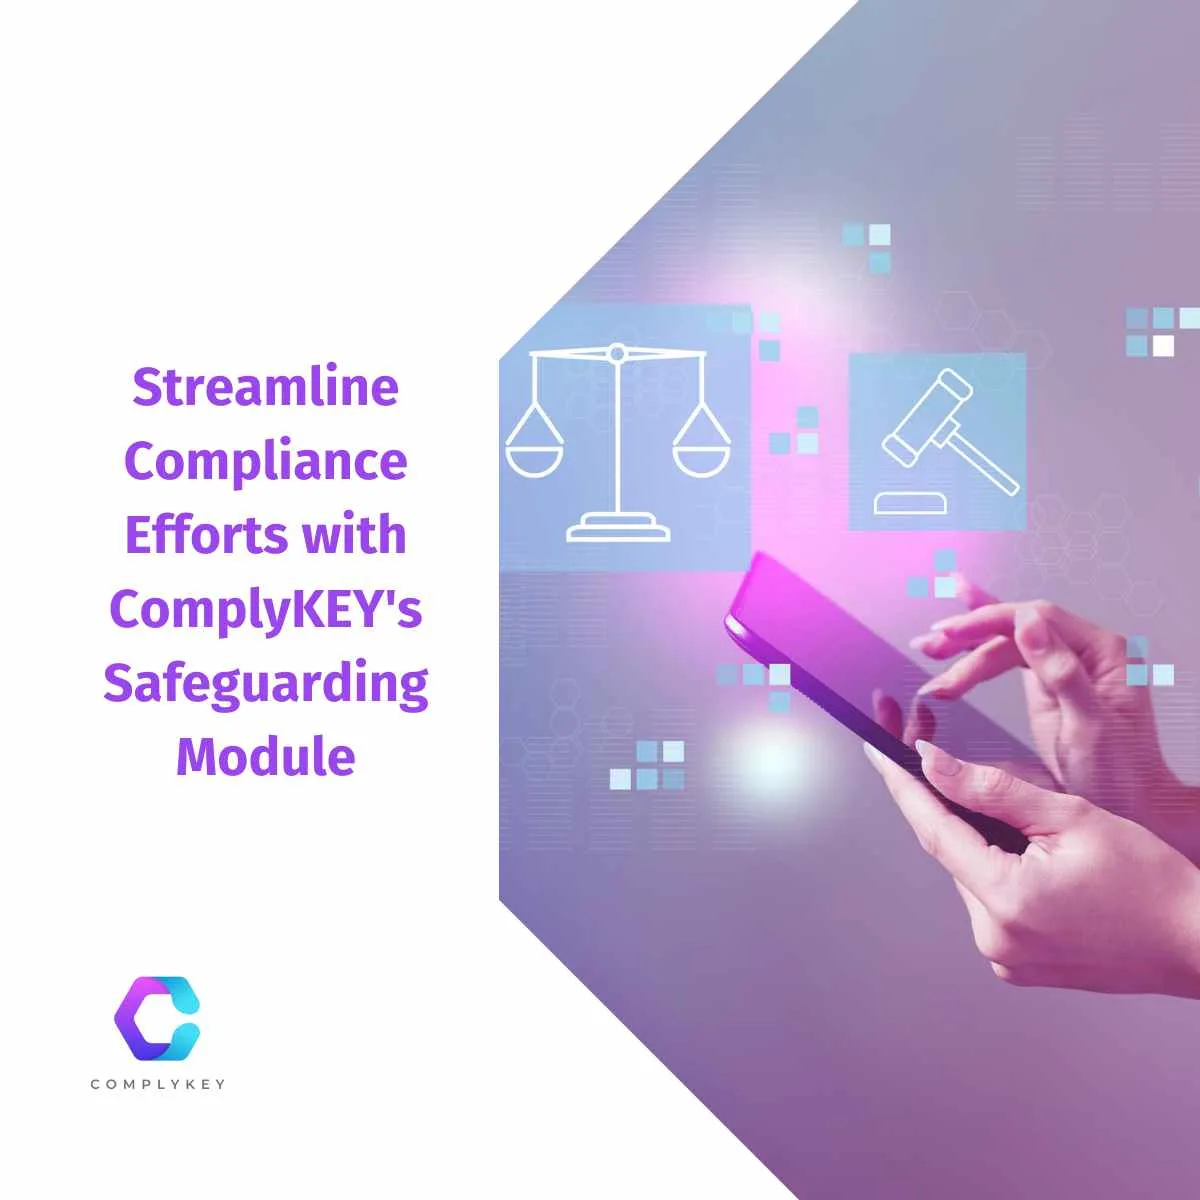 Streamline Compliance Efforts with ComplyKEY's Safeguarding Module